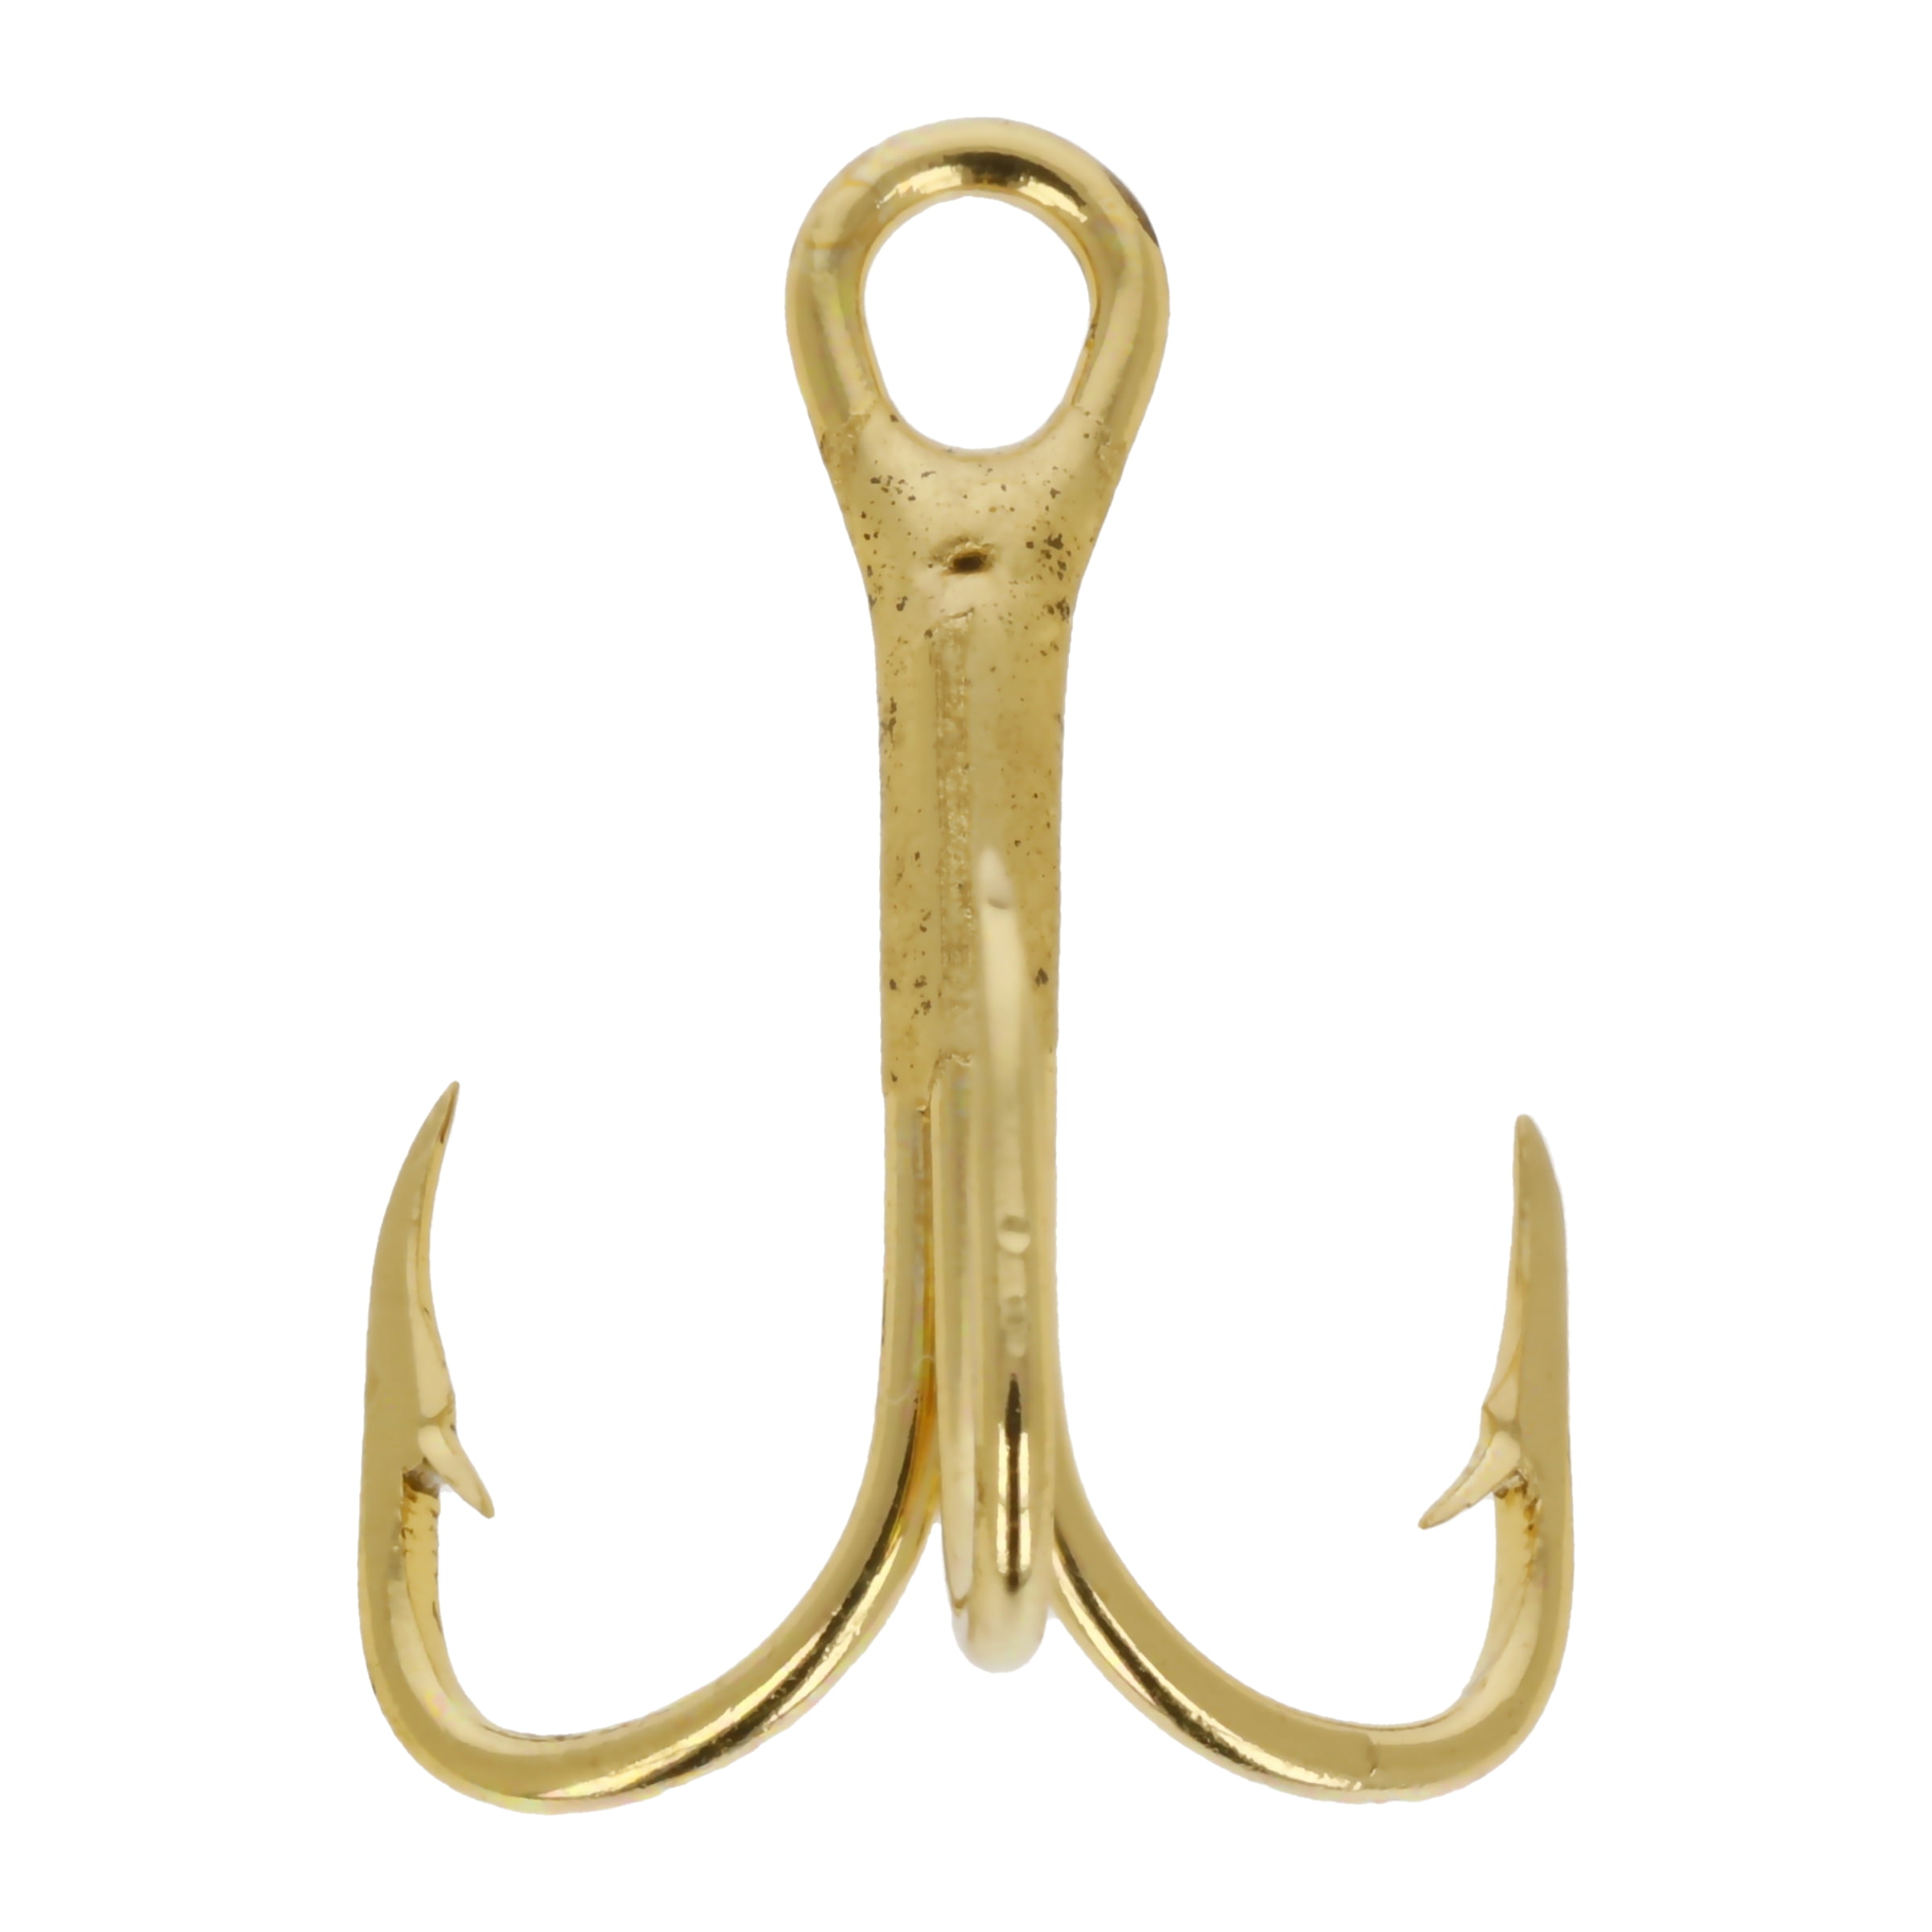 Eagle Claw 376A-12 2X Treble Hook, Gold, Size 12, 5 Pack 